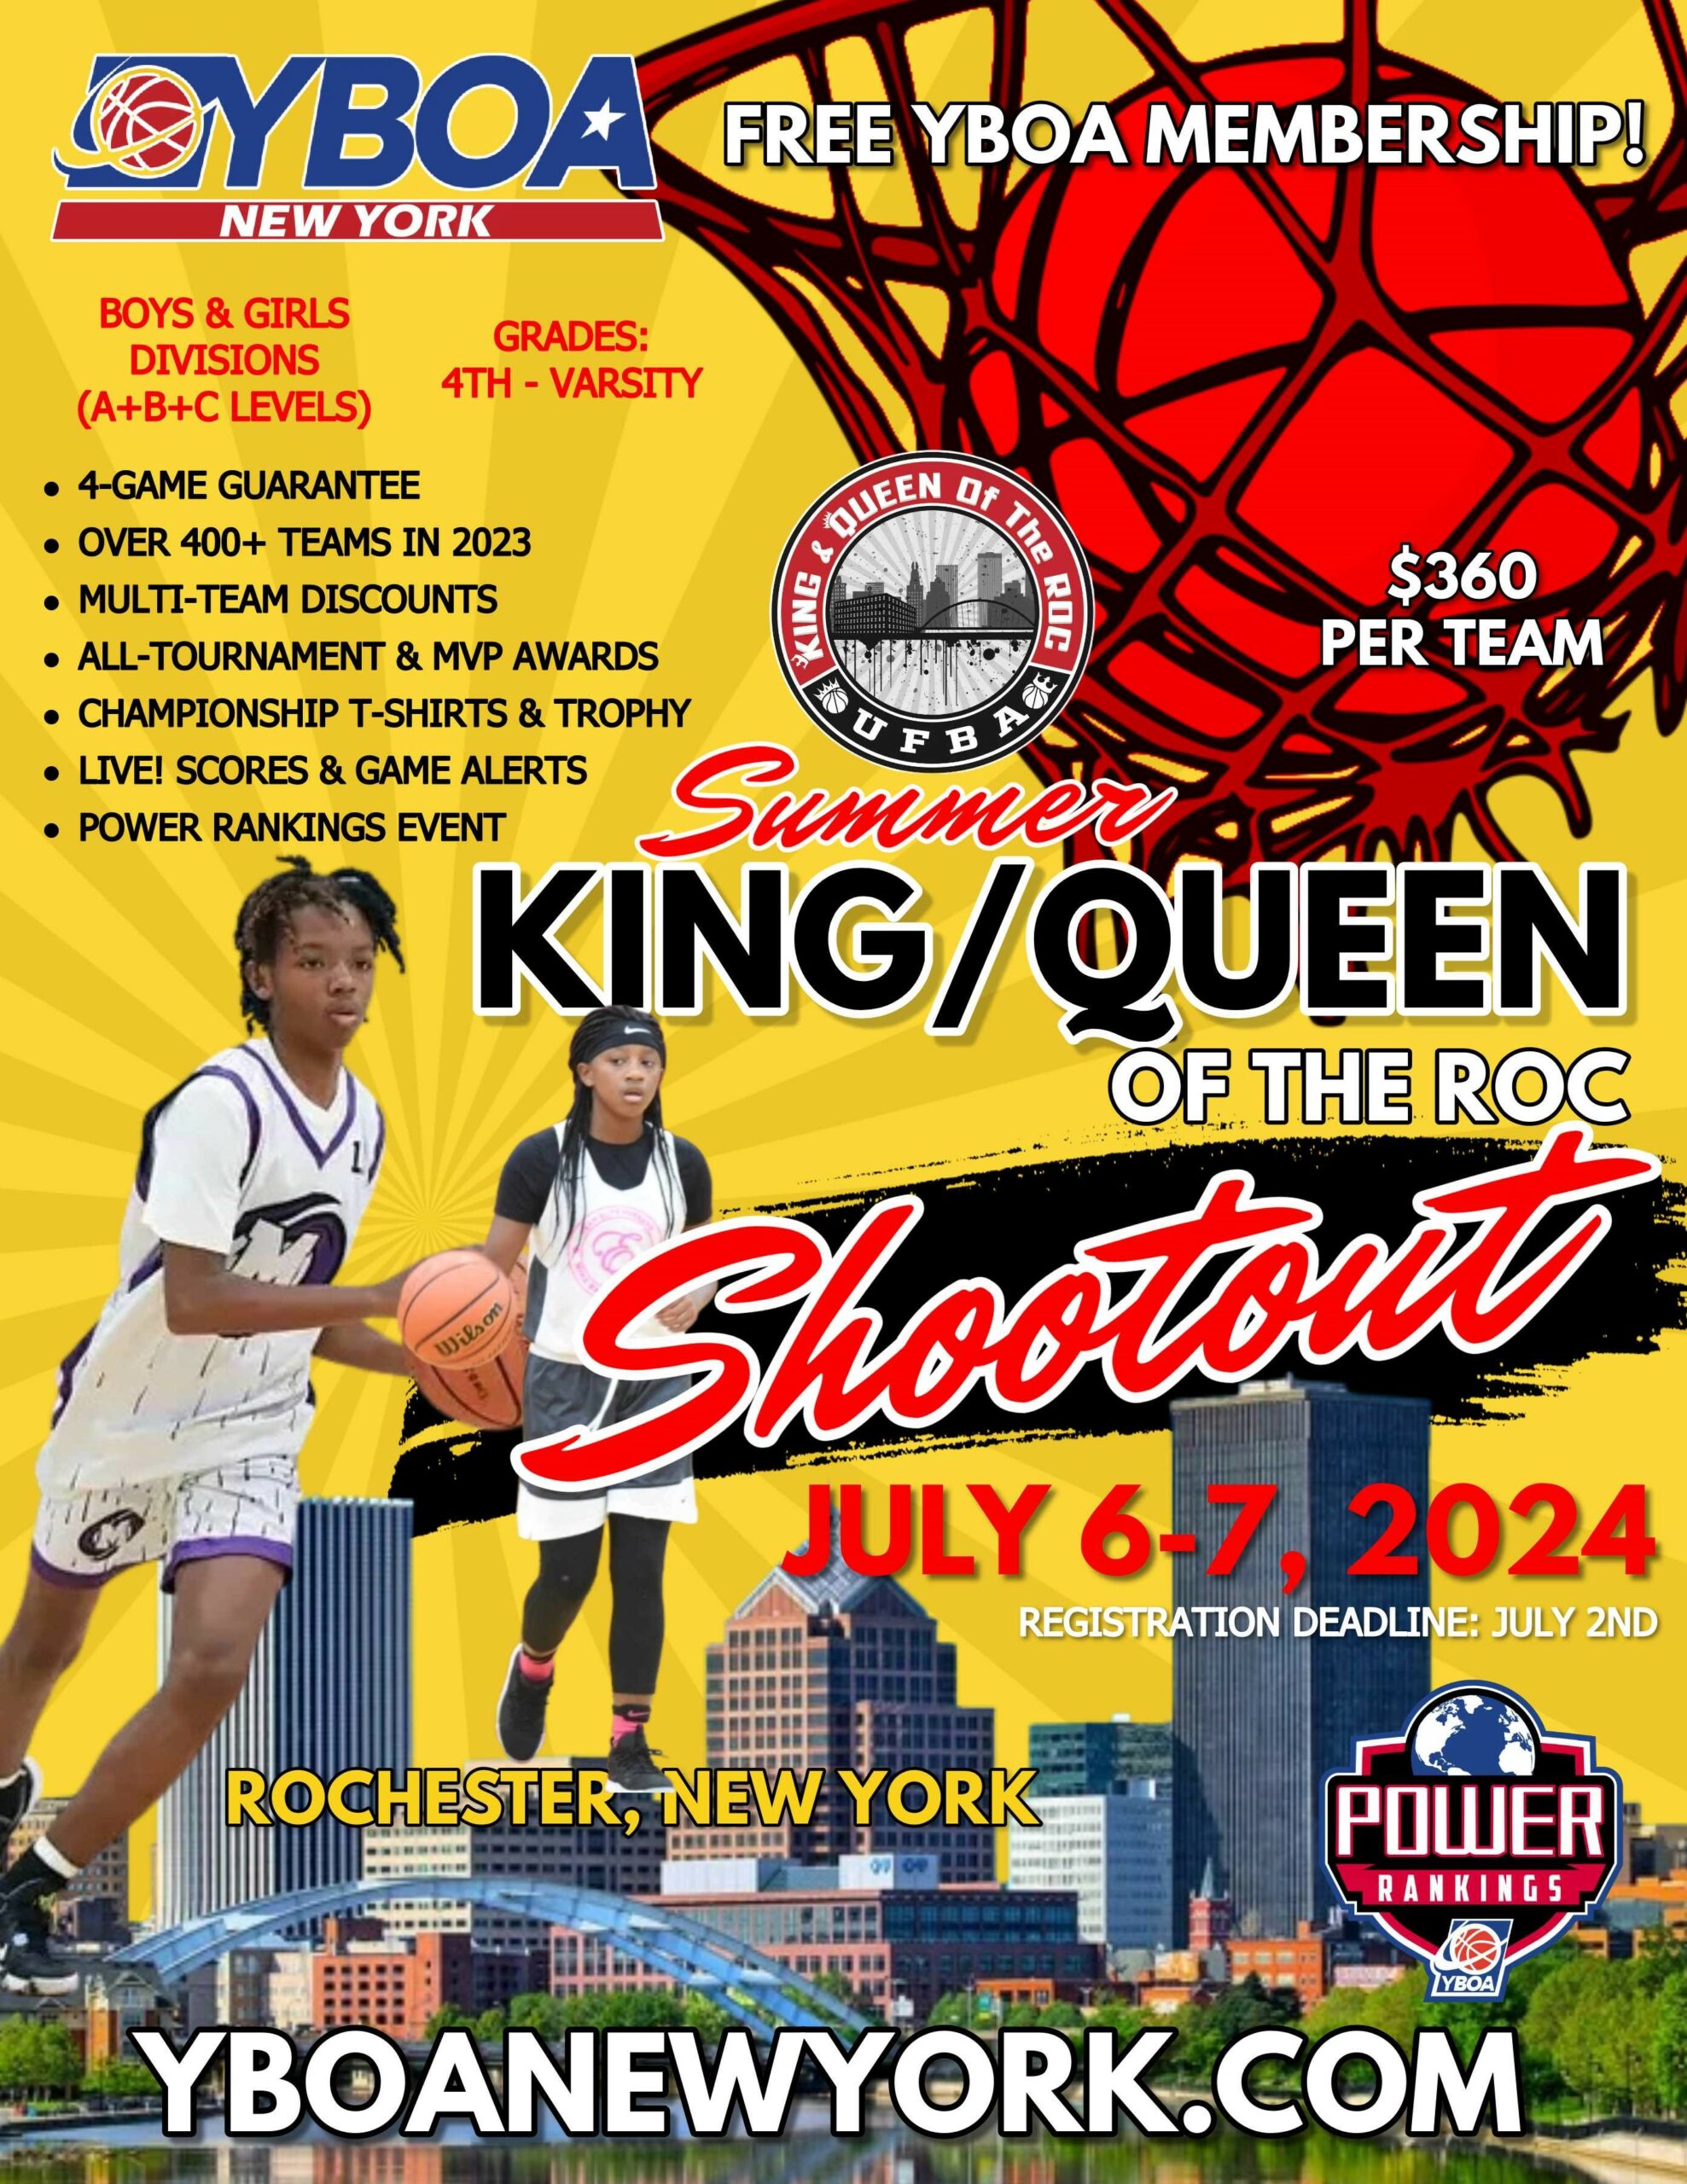 Summer King Queen of the ROC July 6 7 2024